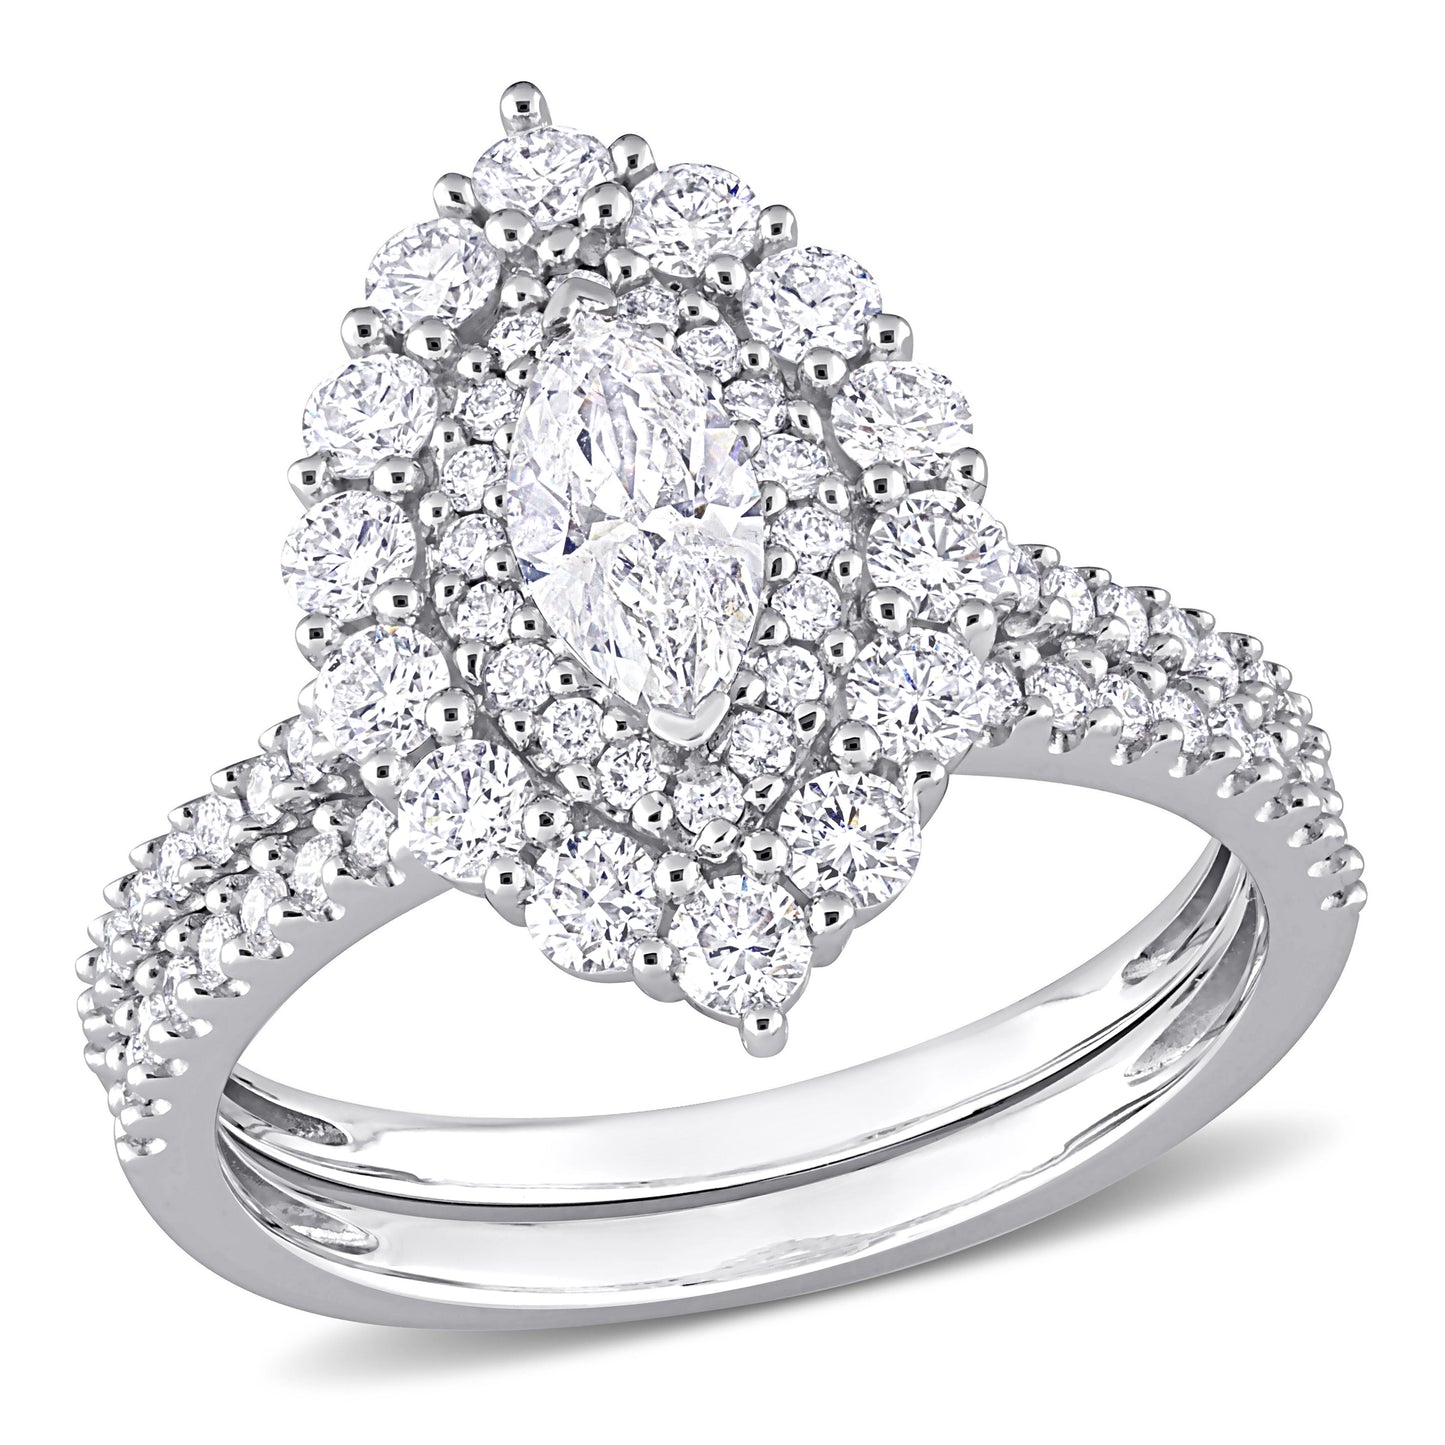 Marquise & Round Diamond Cluster Ring Set in 14k White Gold